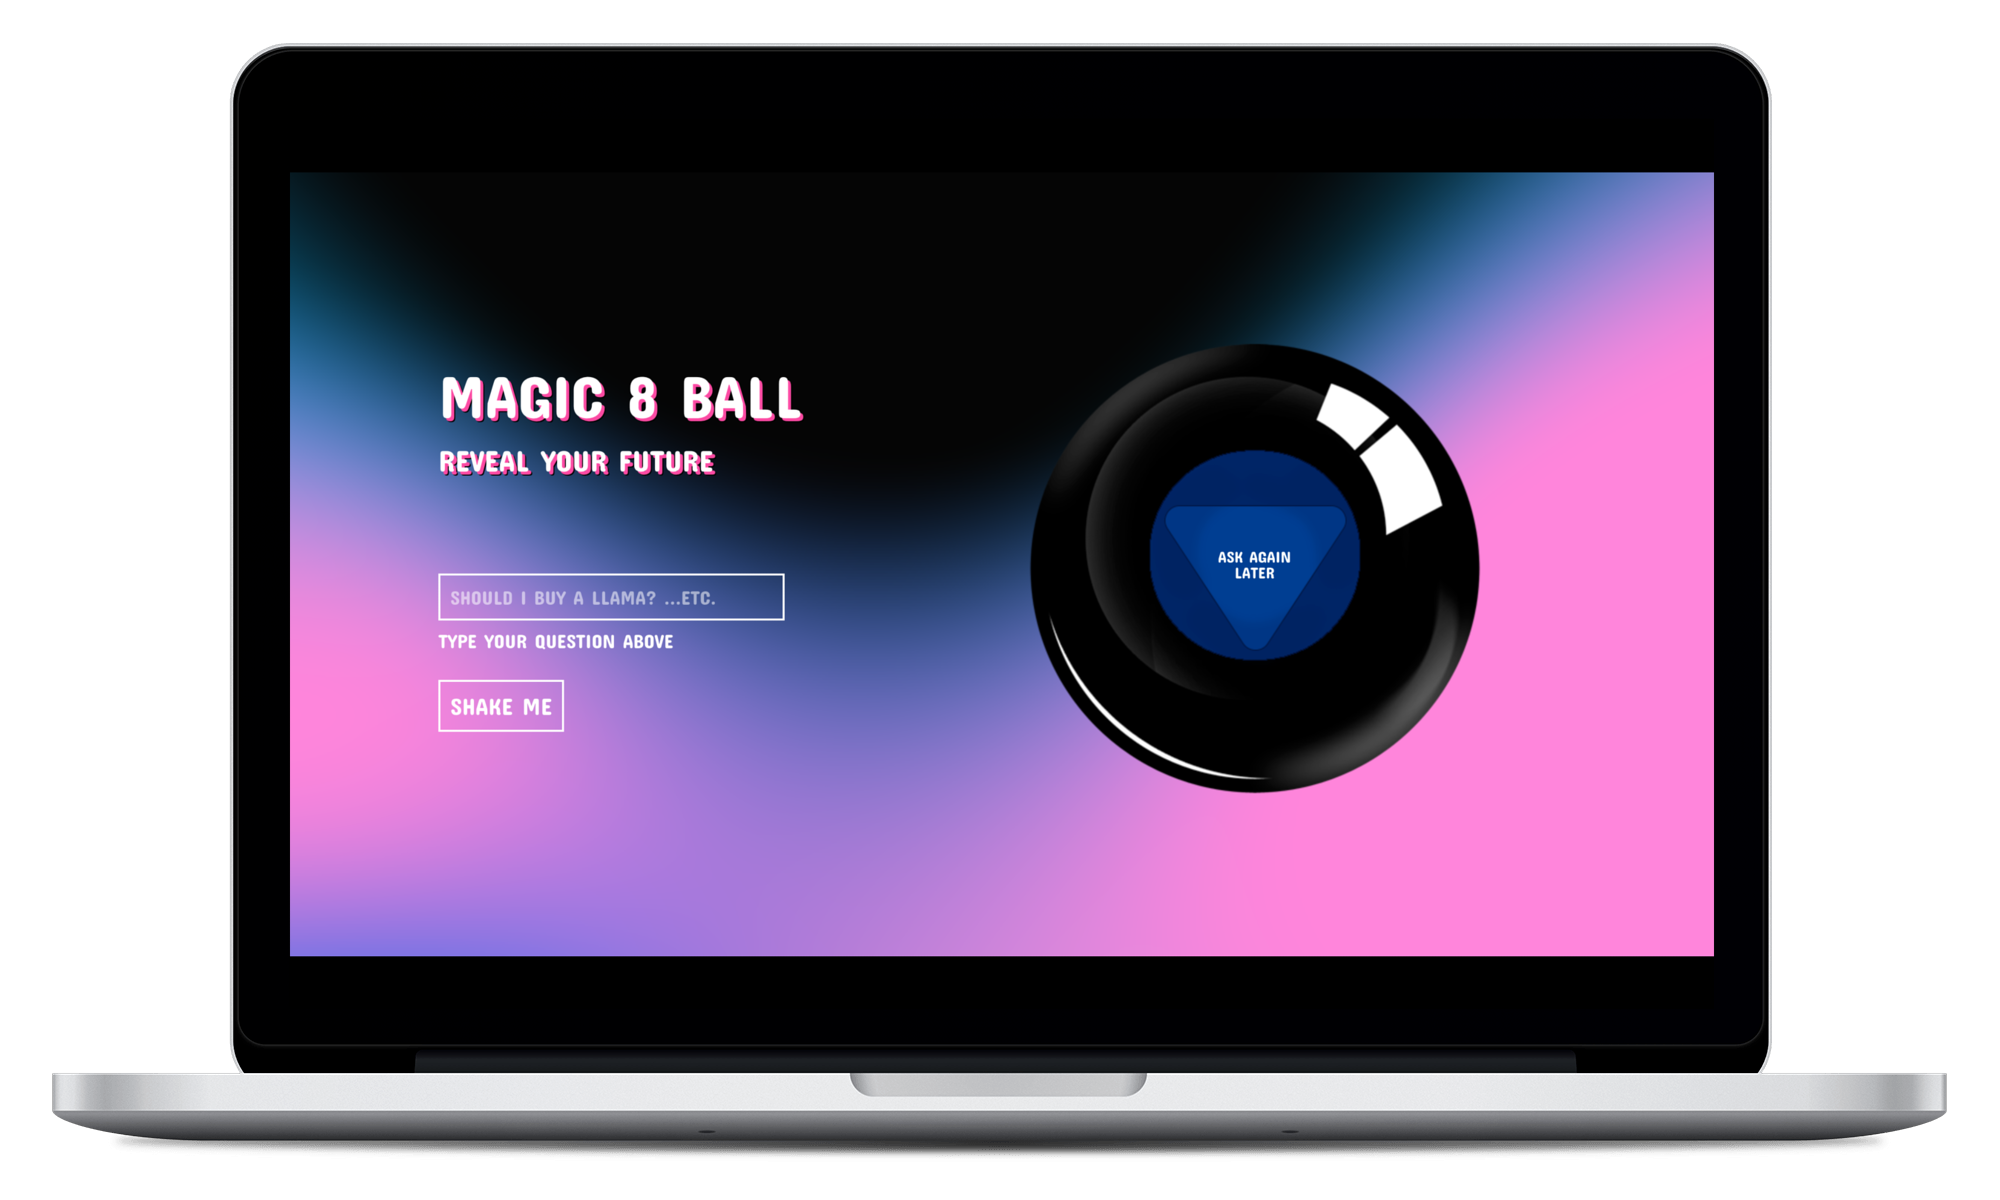 A Macbook screen mockup of a Magic 8 Ball web application created by Blaire